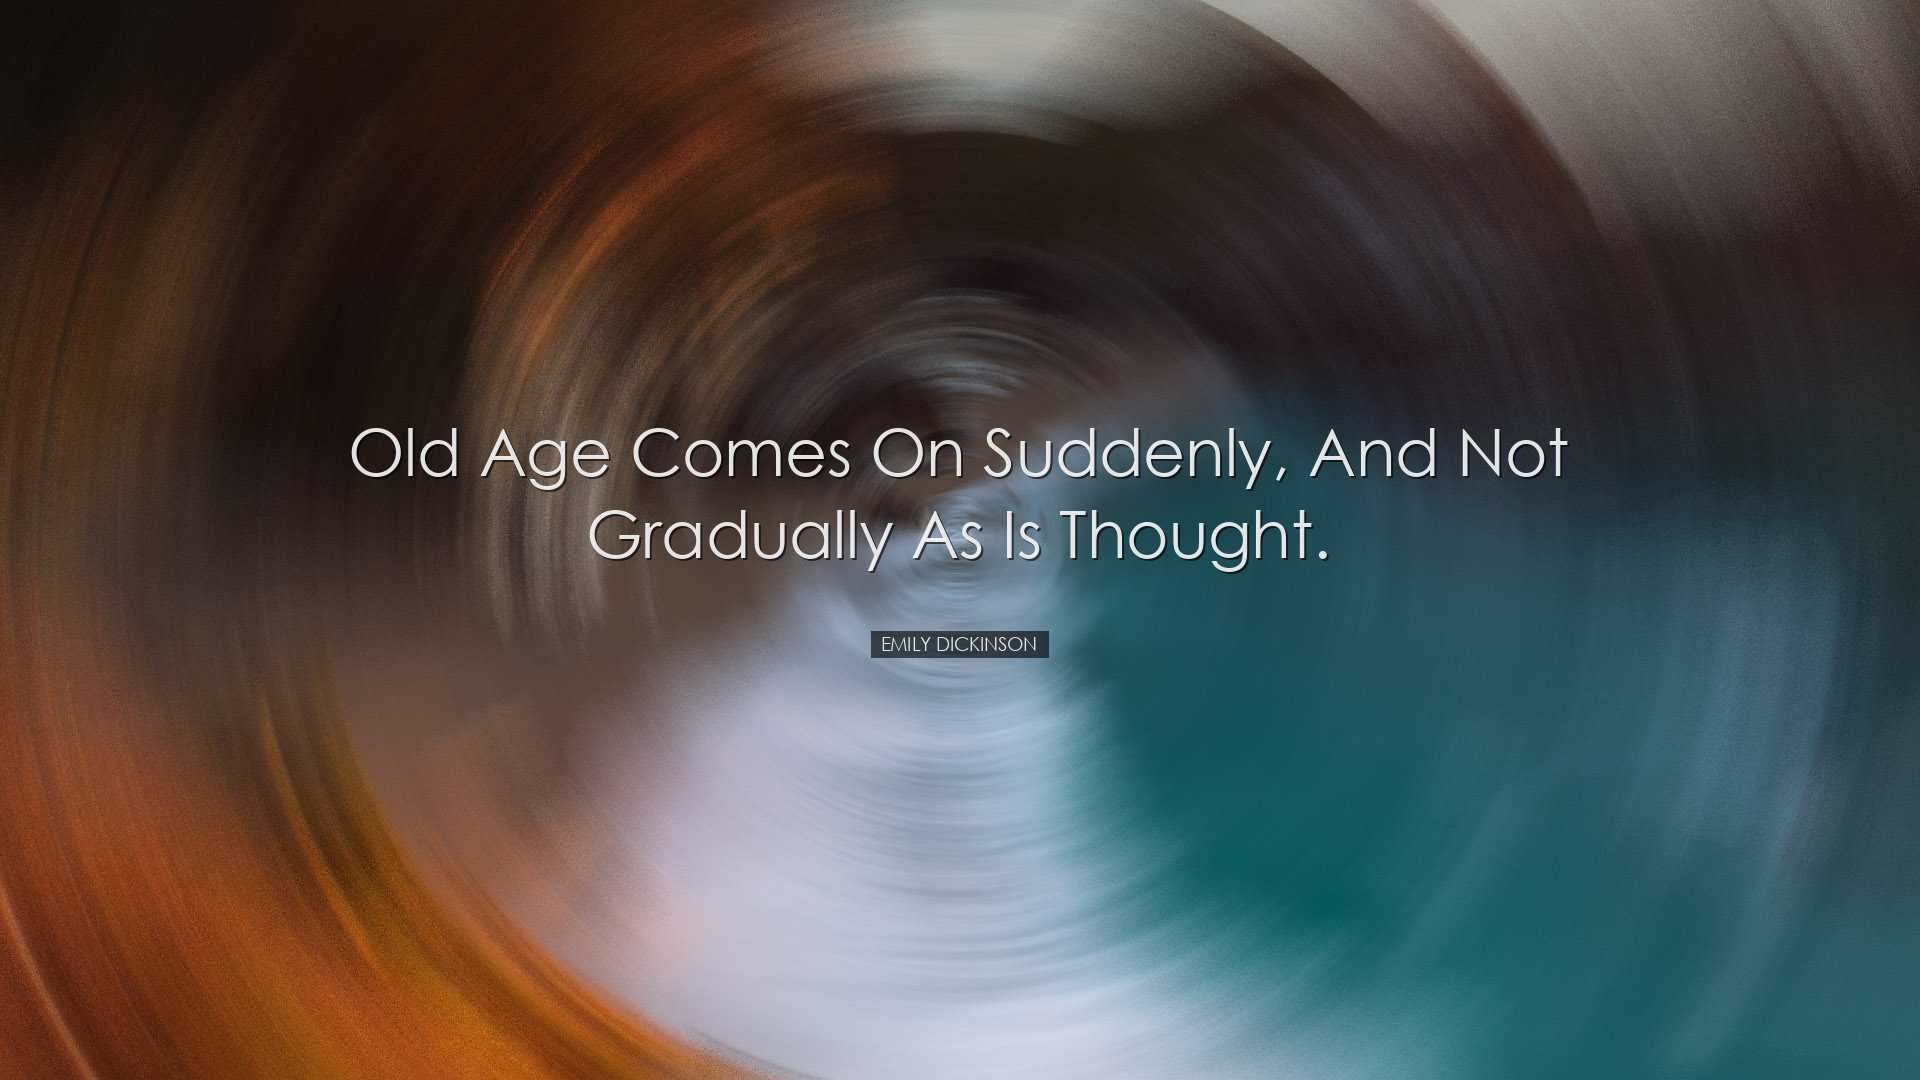 Old age comes on suddenly, and not gradually as is thought. - Emil